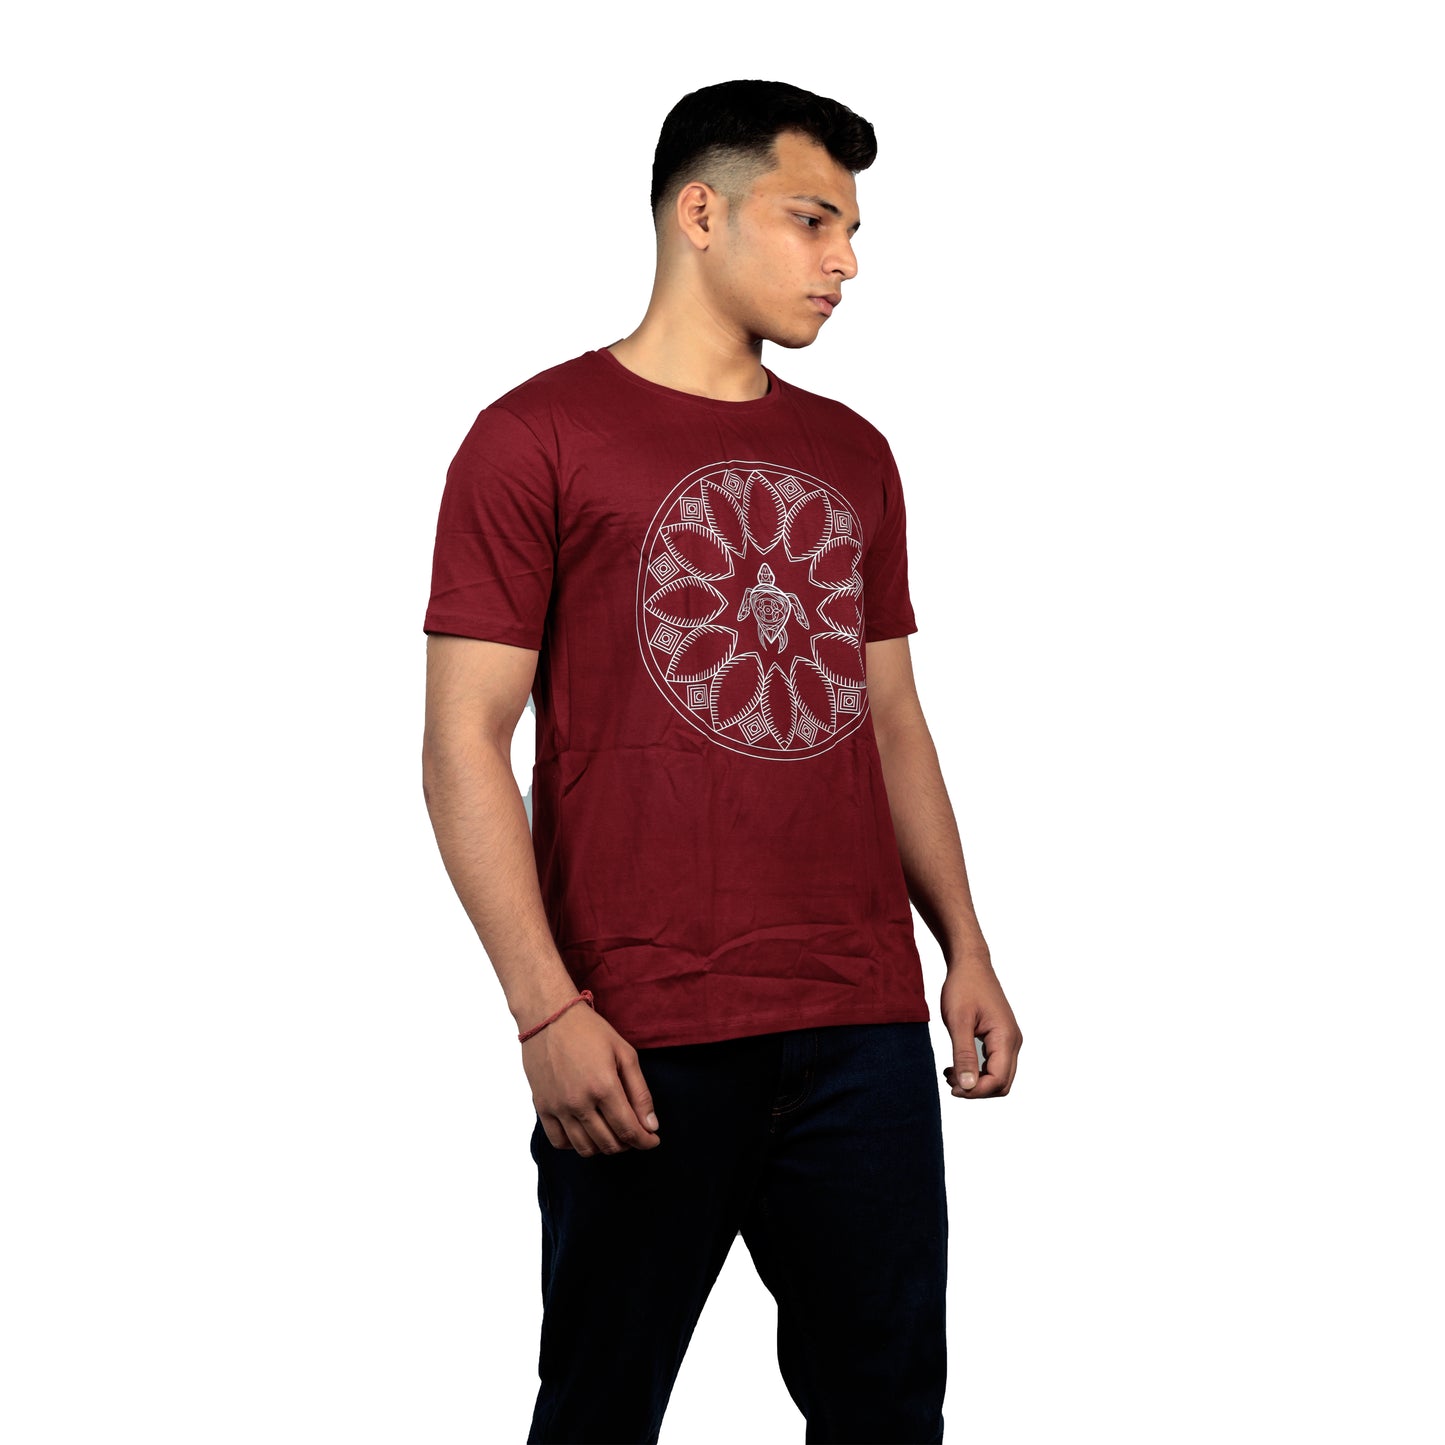 Nirvana Turtle -9  T-shirts In Maroon Color For Men